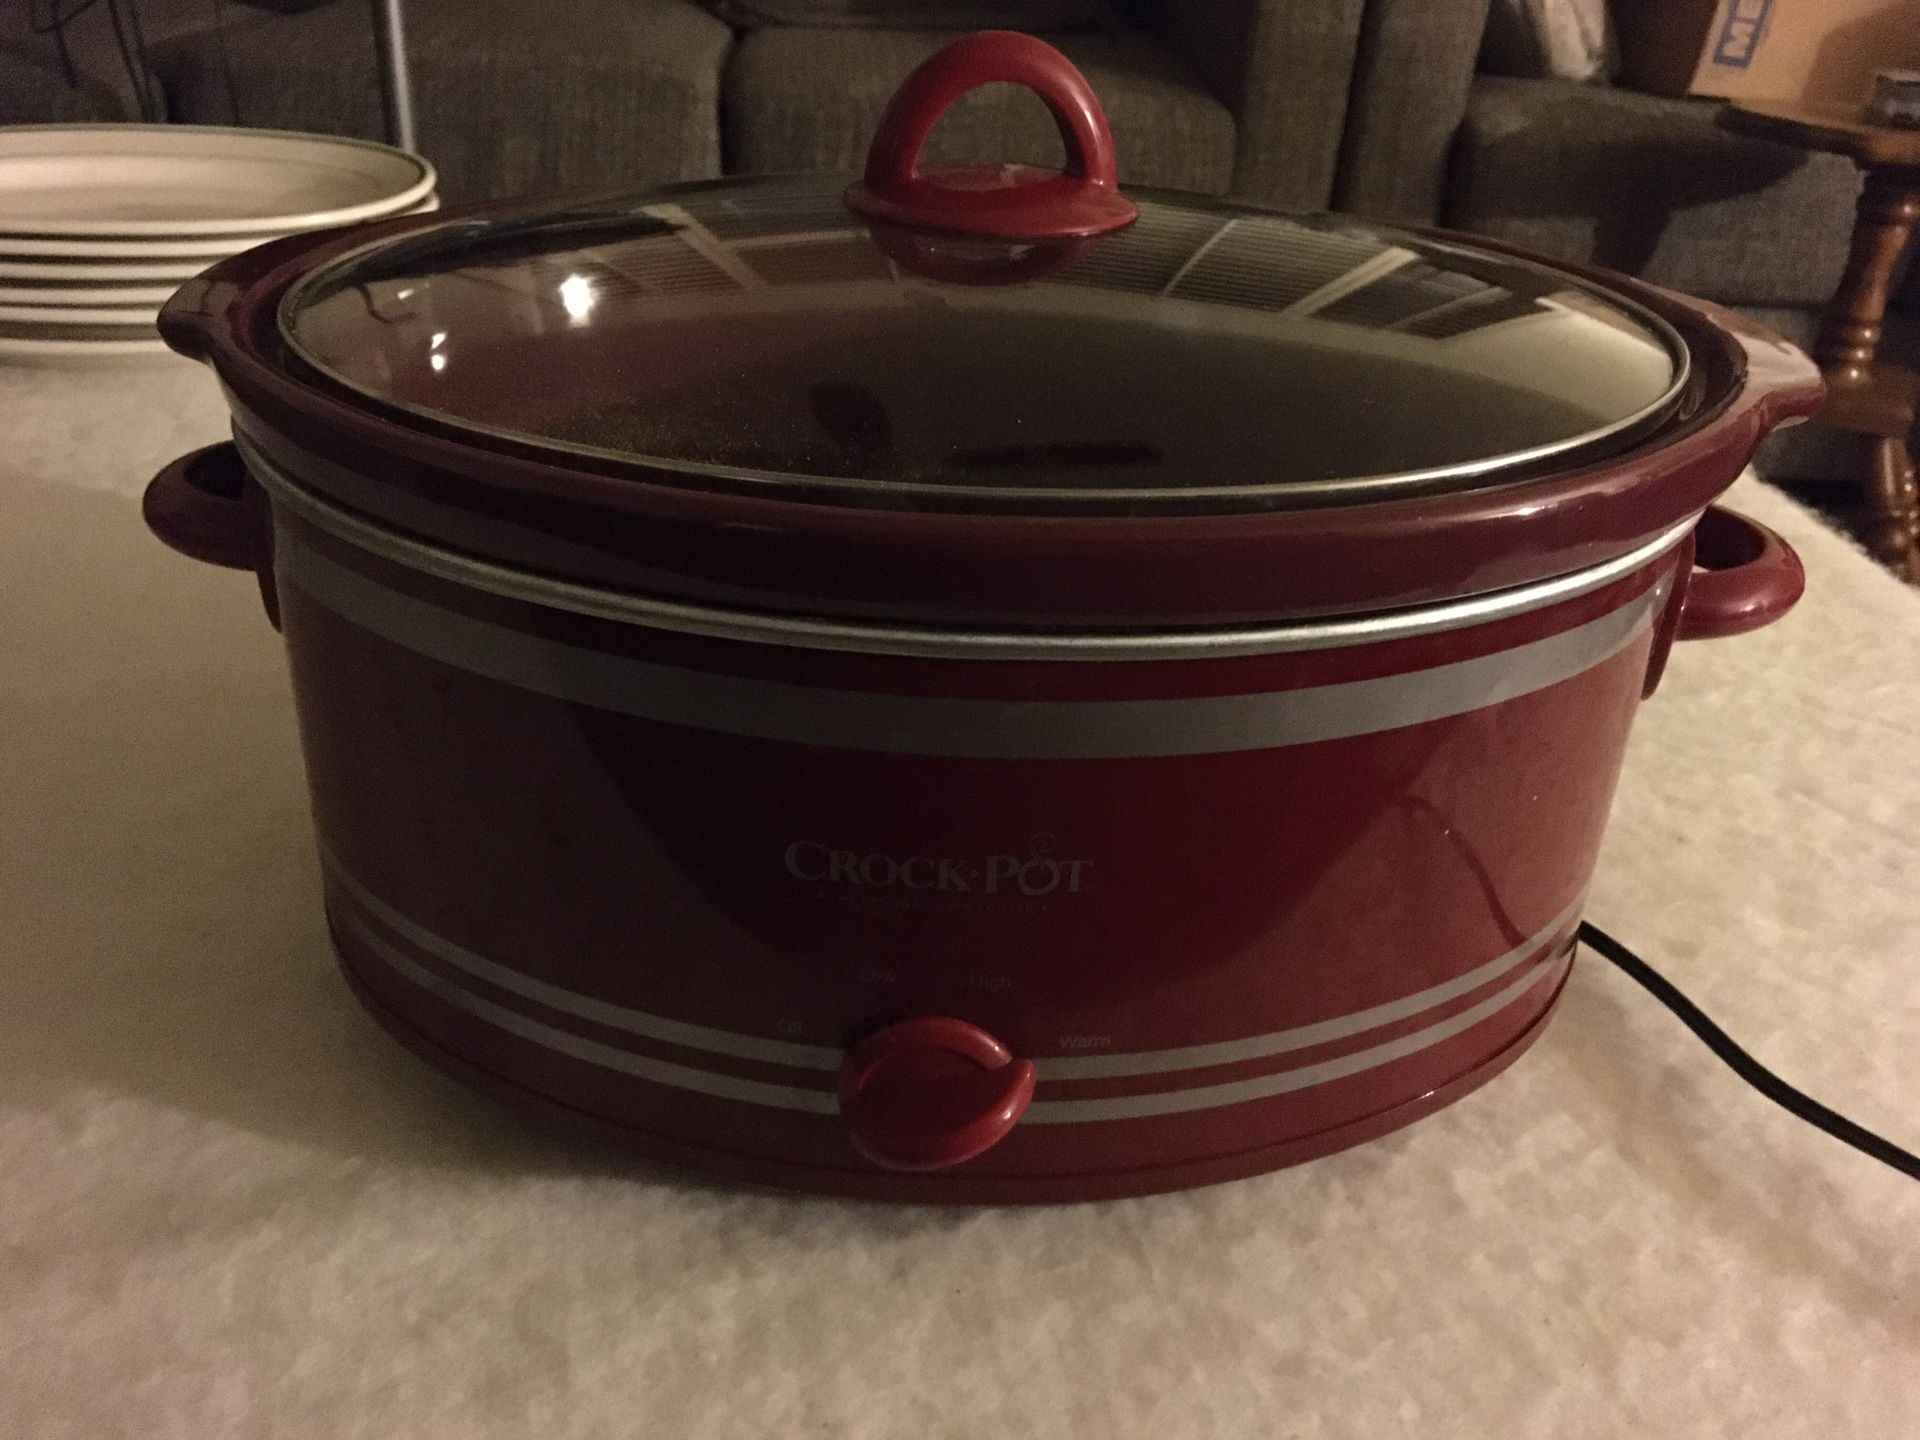 Crock pot 6 qt in great working condition